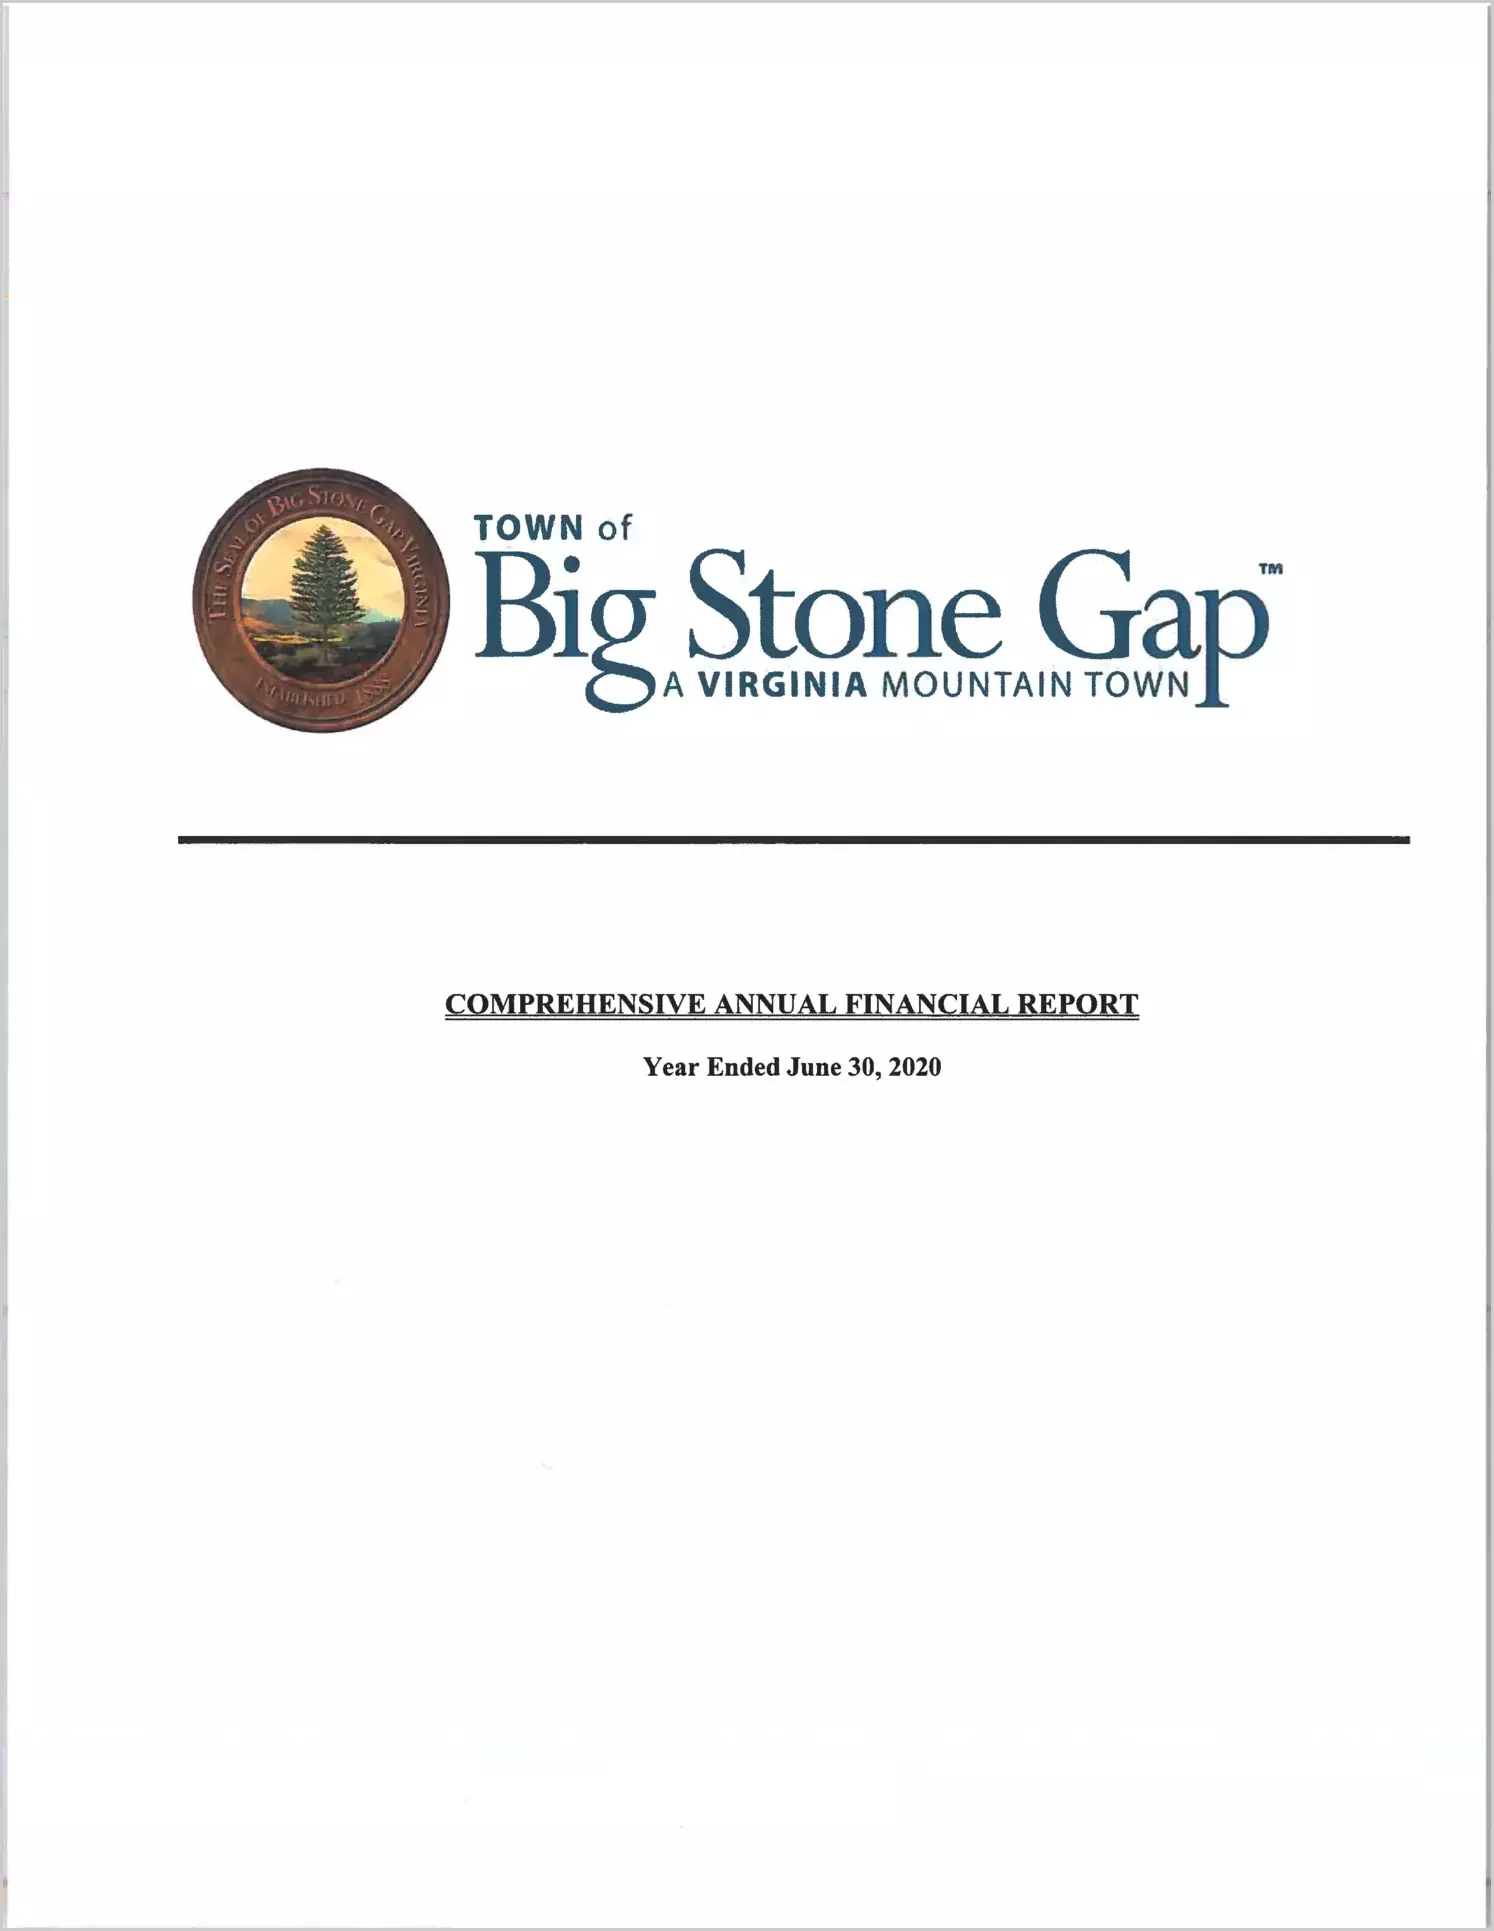 2020 Annual Financial Report for Town of Big Stone Gap